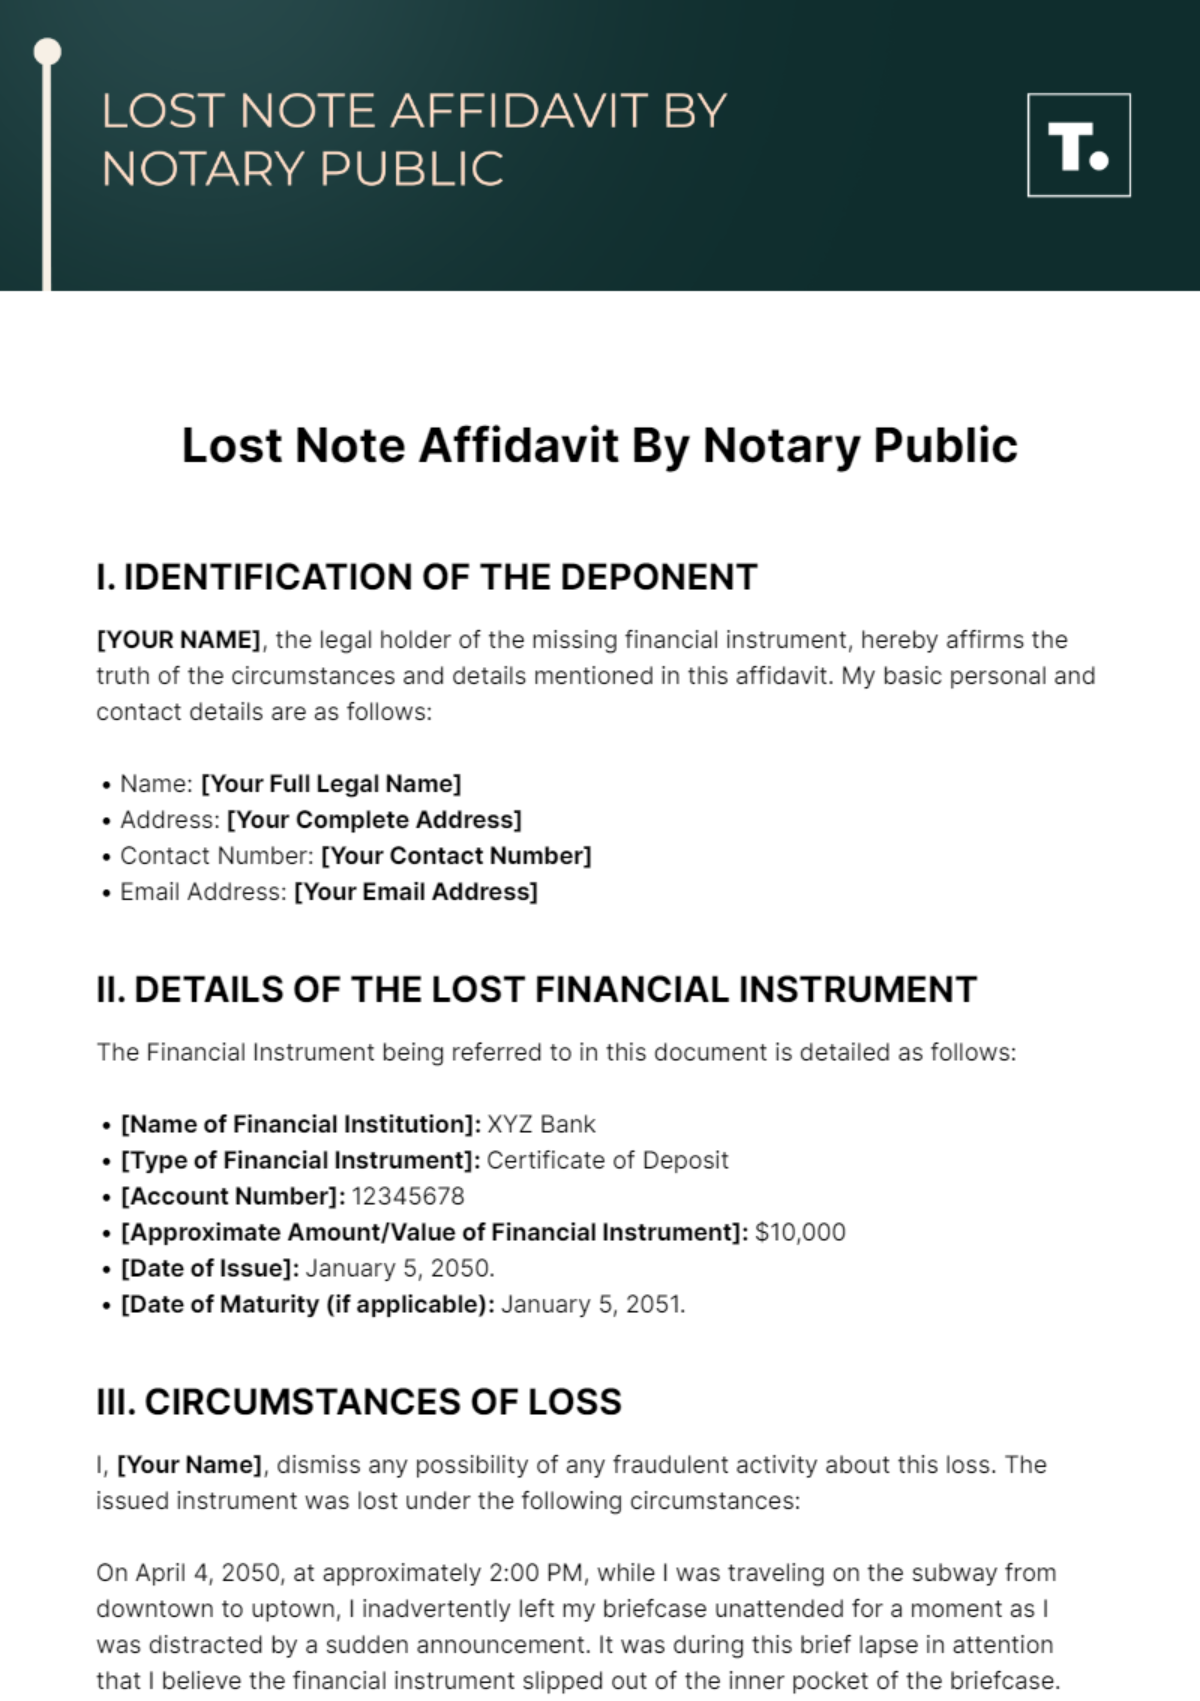 Free Lost Note Affidavit By Notary Public Template